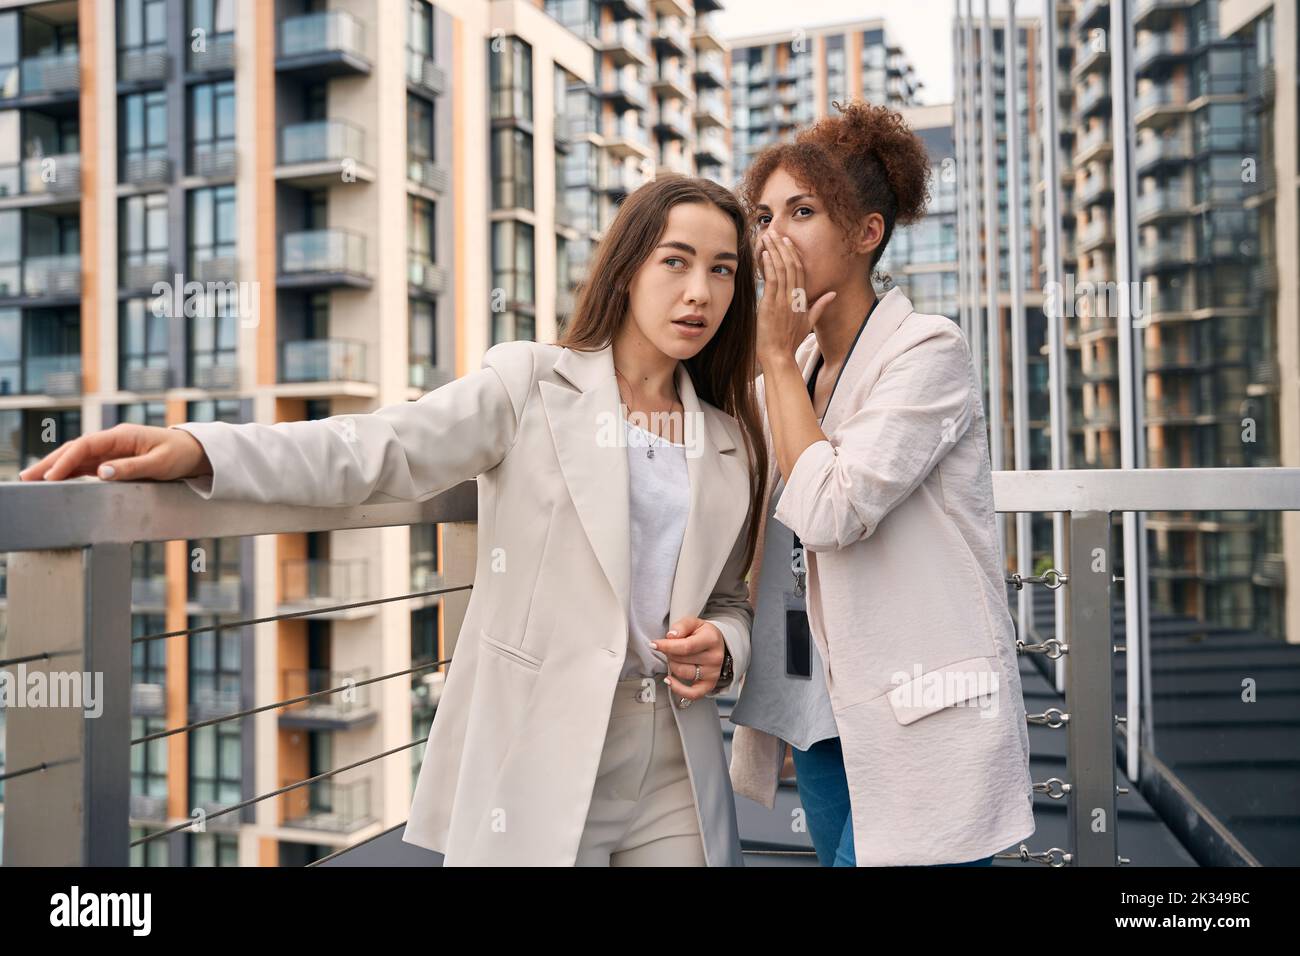 Office employee telling secret to her coworker outdoors Stock Photo